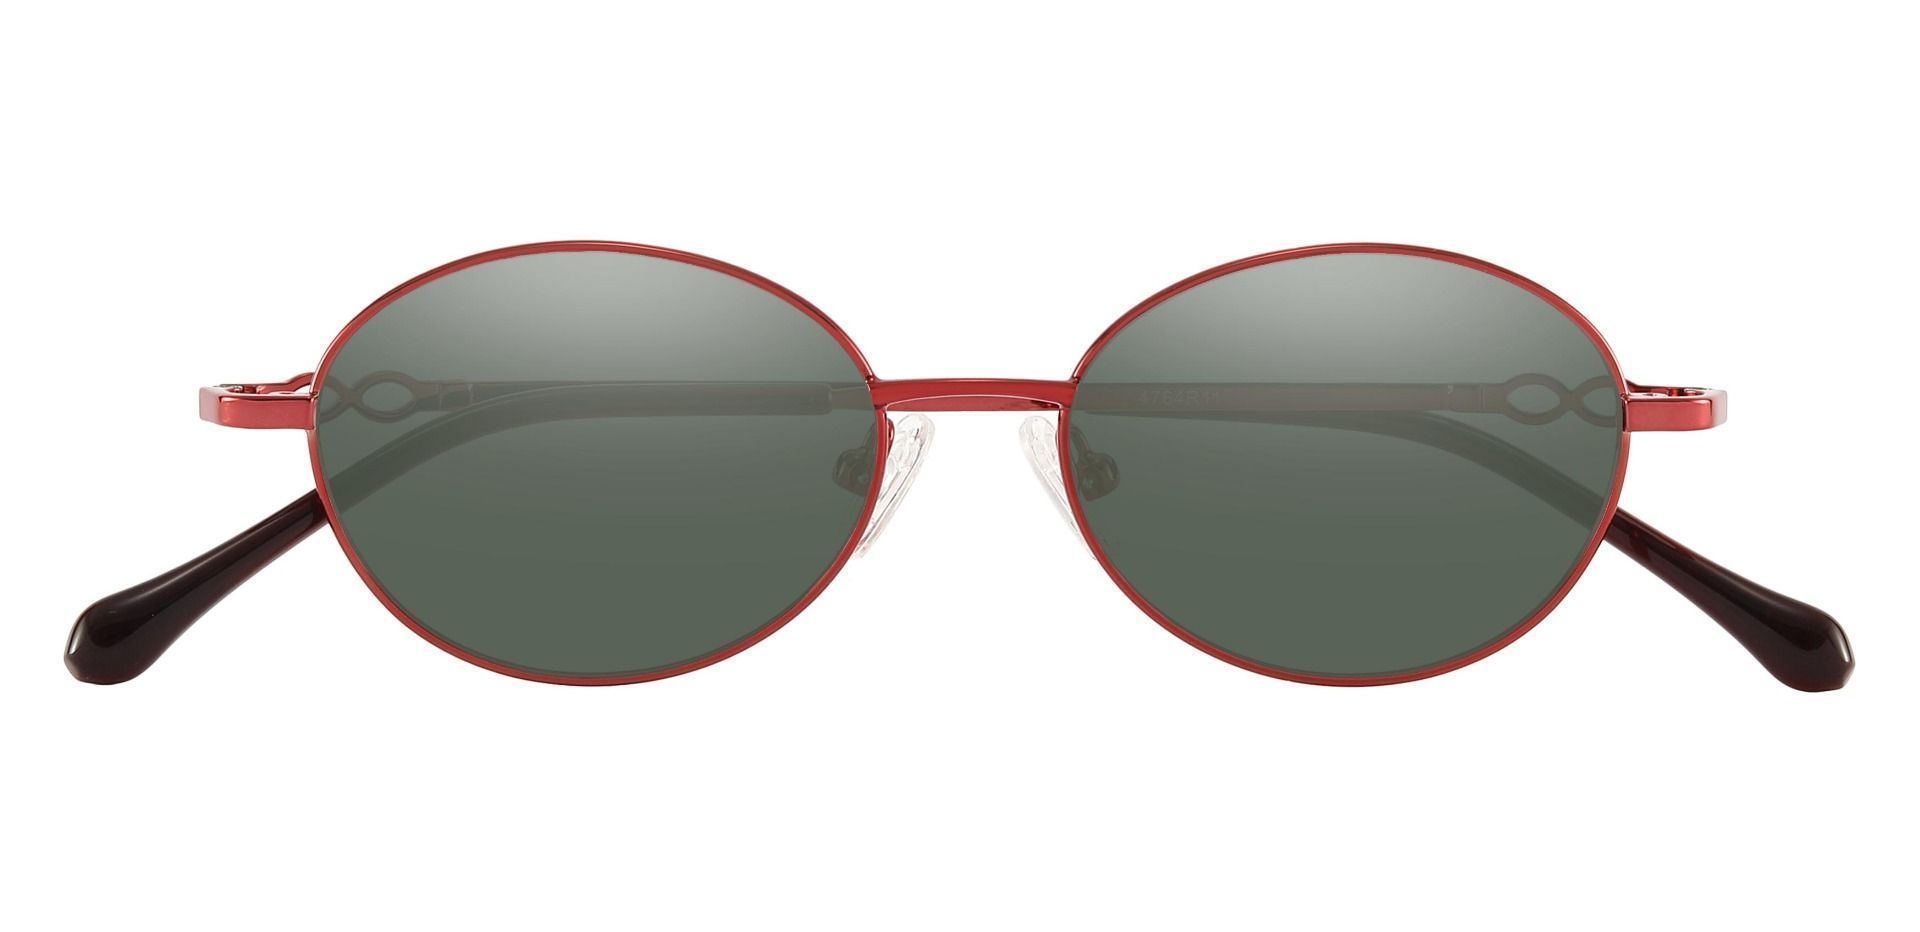 Odyssey Oval Progressive Sunglasses - Red Frame With Green Lenses